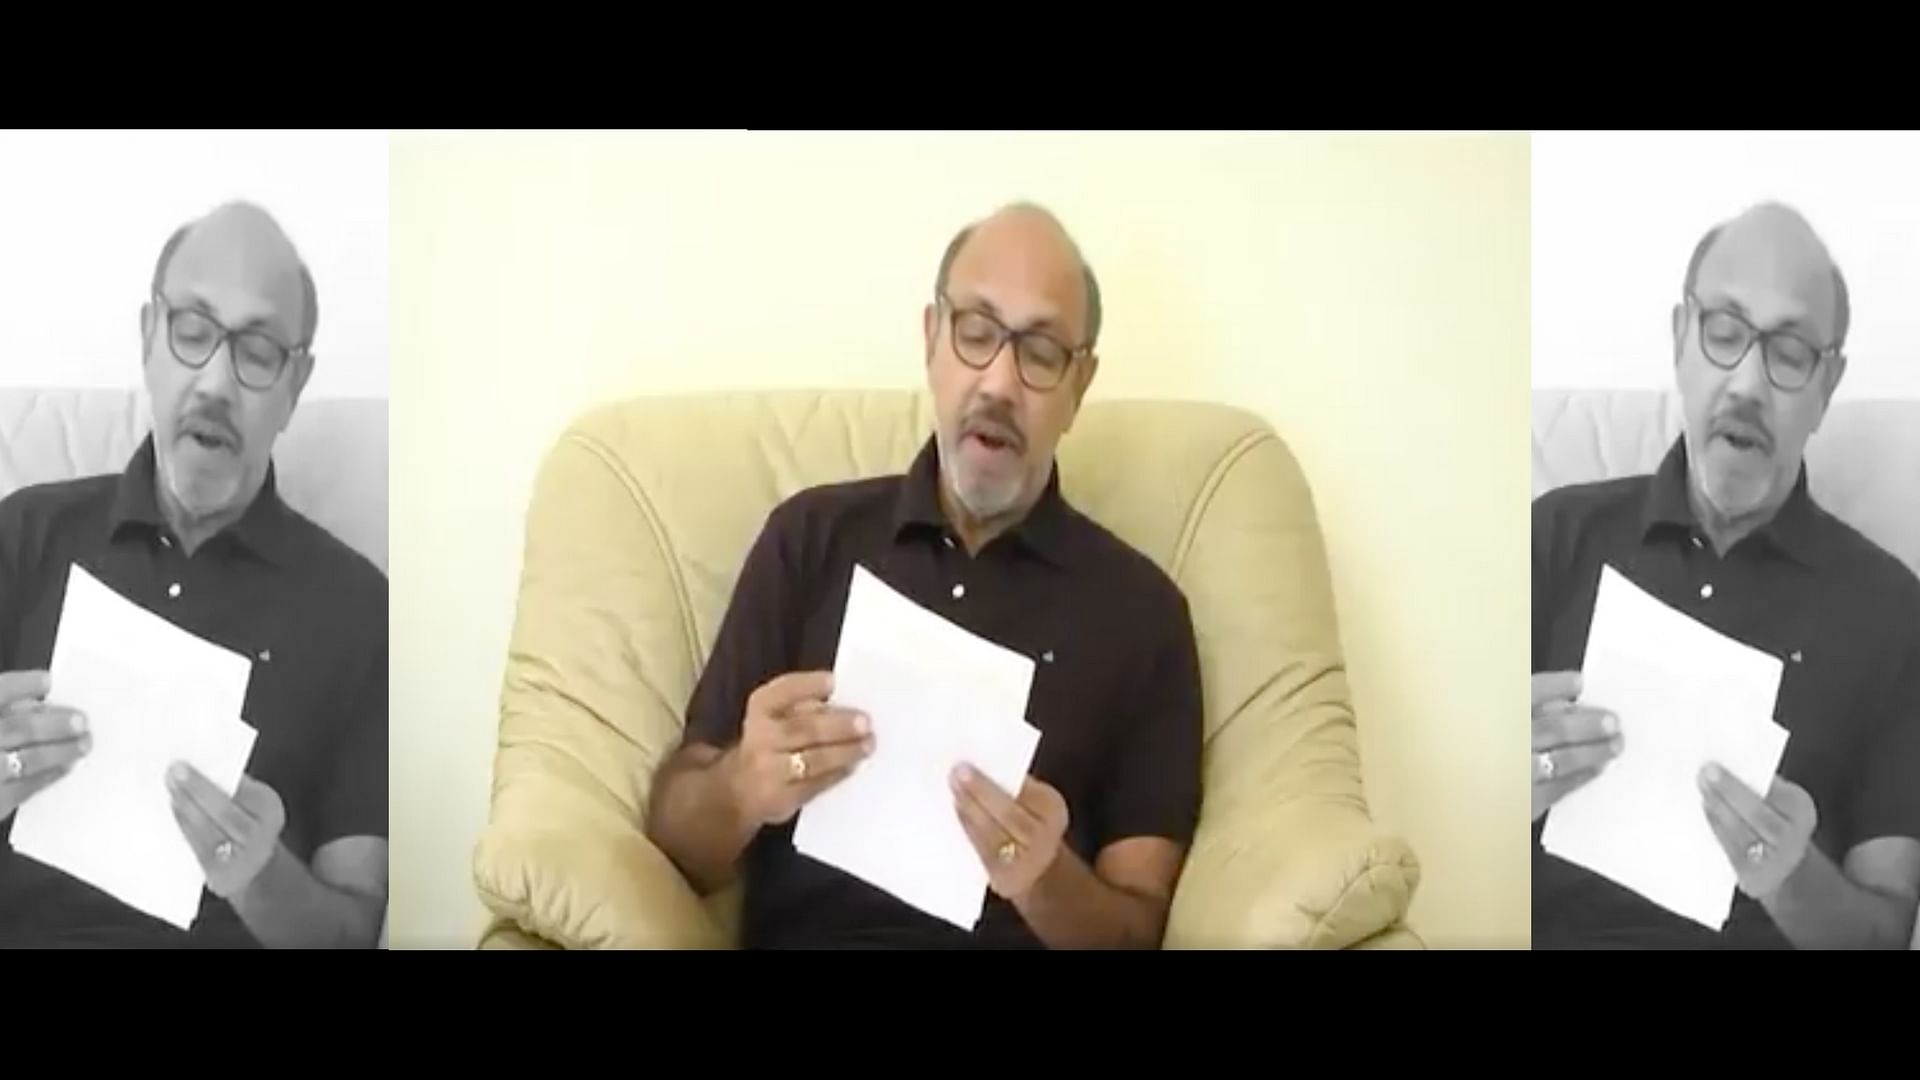 Sathyaraj apologises for his comments against Karnataka made 9 years back. (Photo courtesy: Twitter)